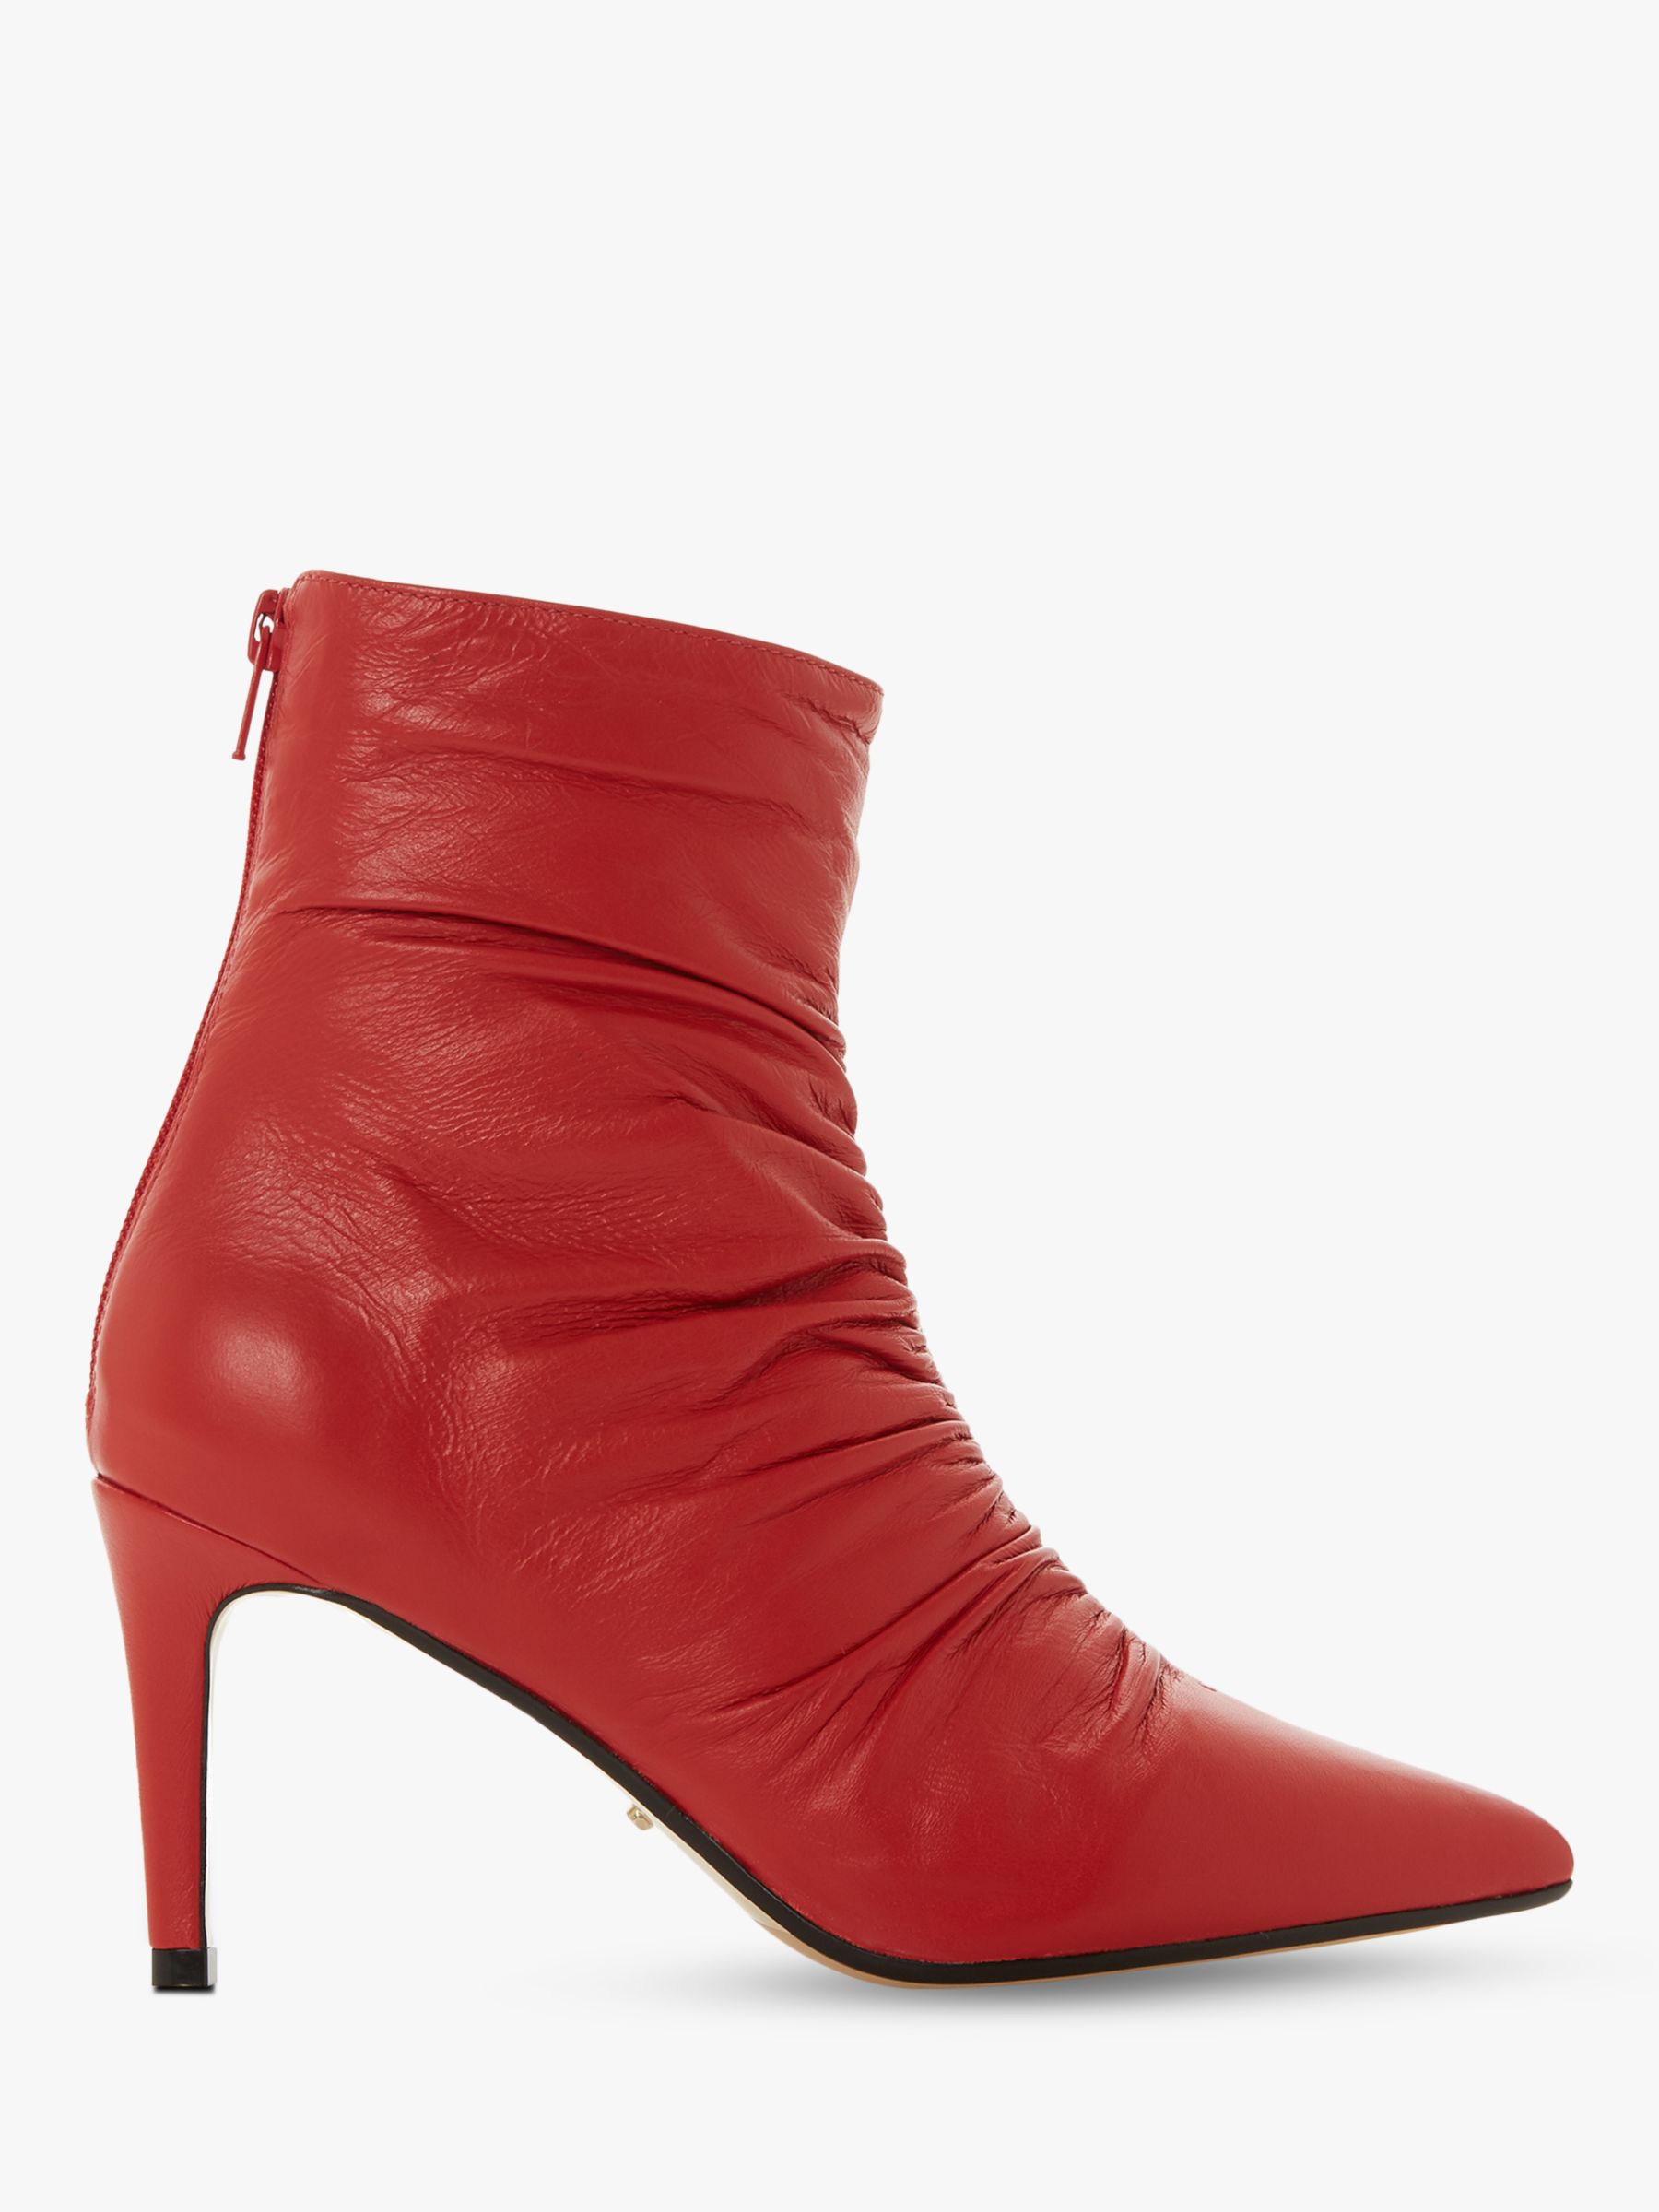 Dune Oasis Stiletto Heel Ankle Boots at 